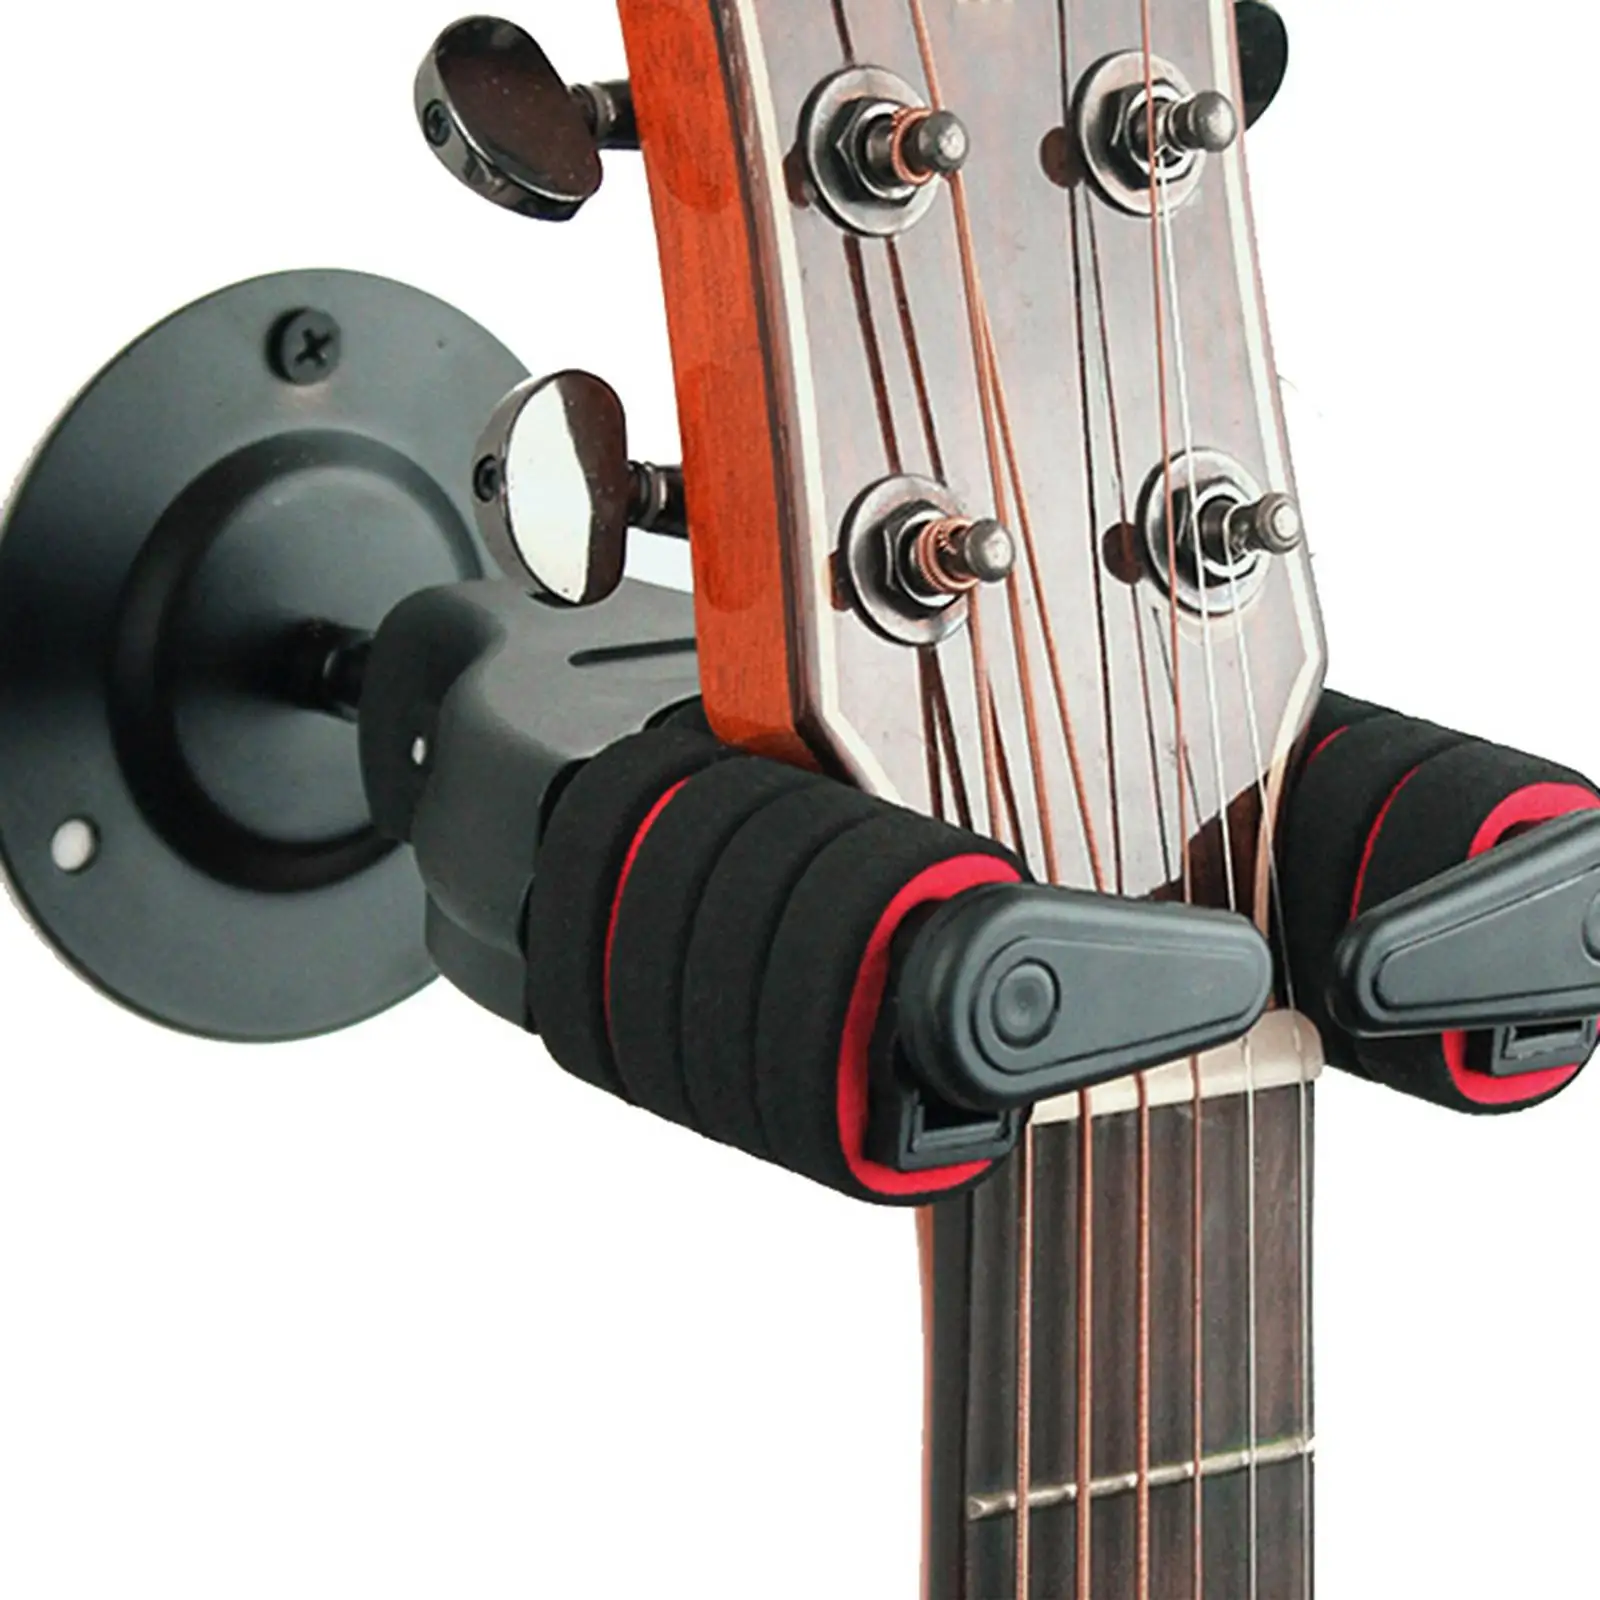 Guitar Wall Rack Display Hanger Auto Lock Stand Non Slip Wall Mount Holder Stand